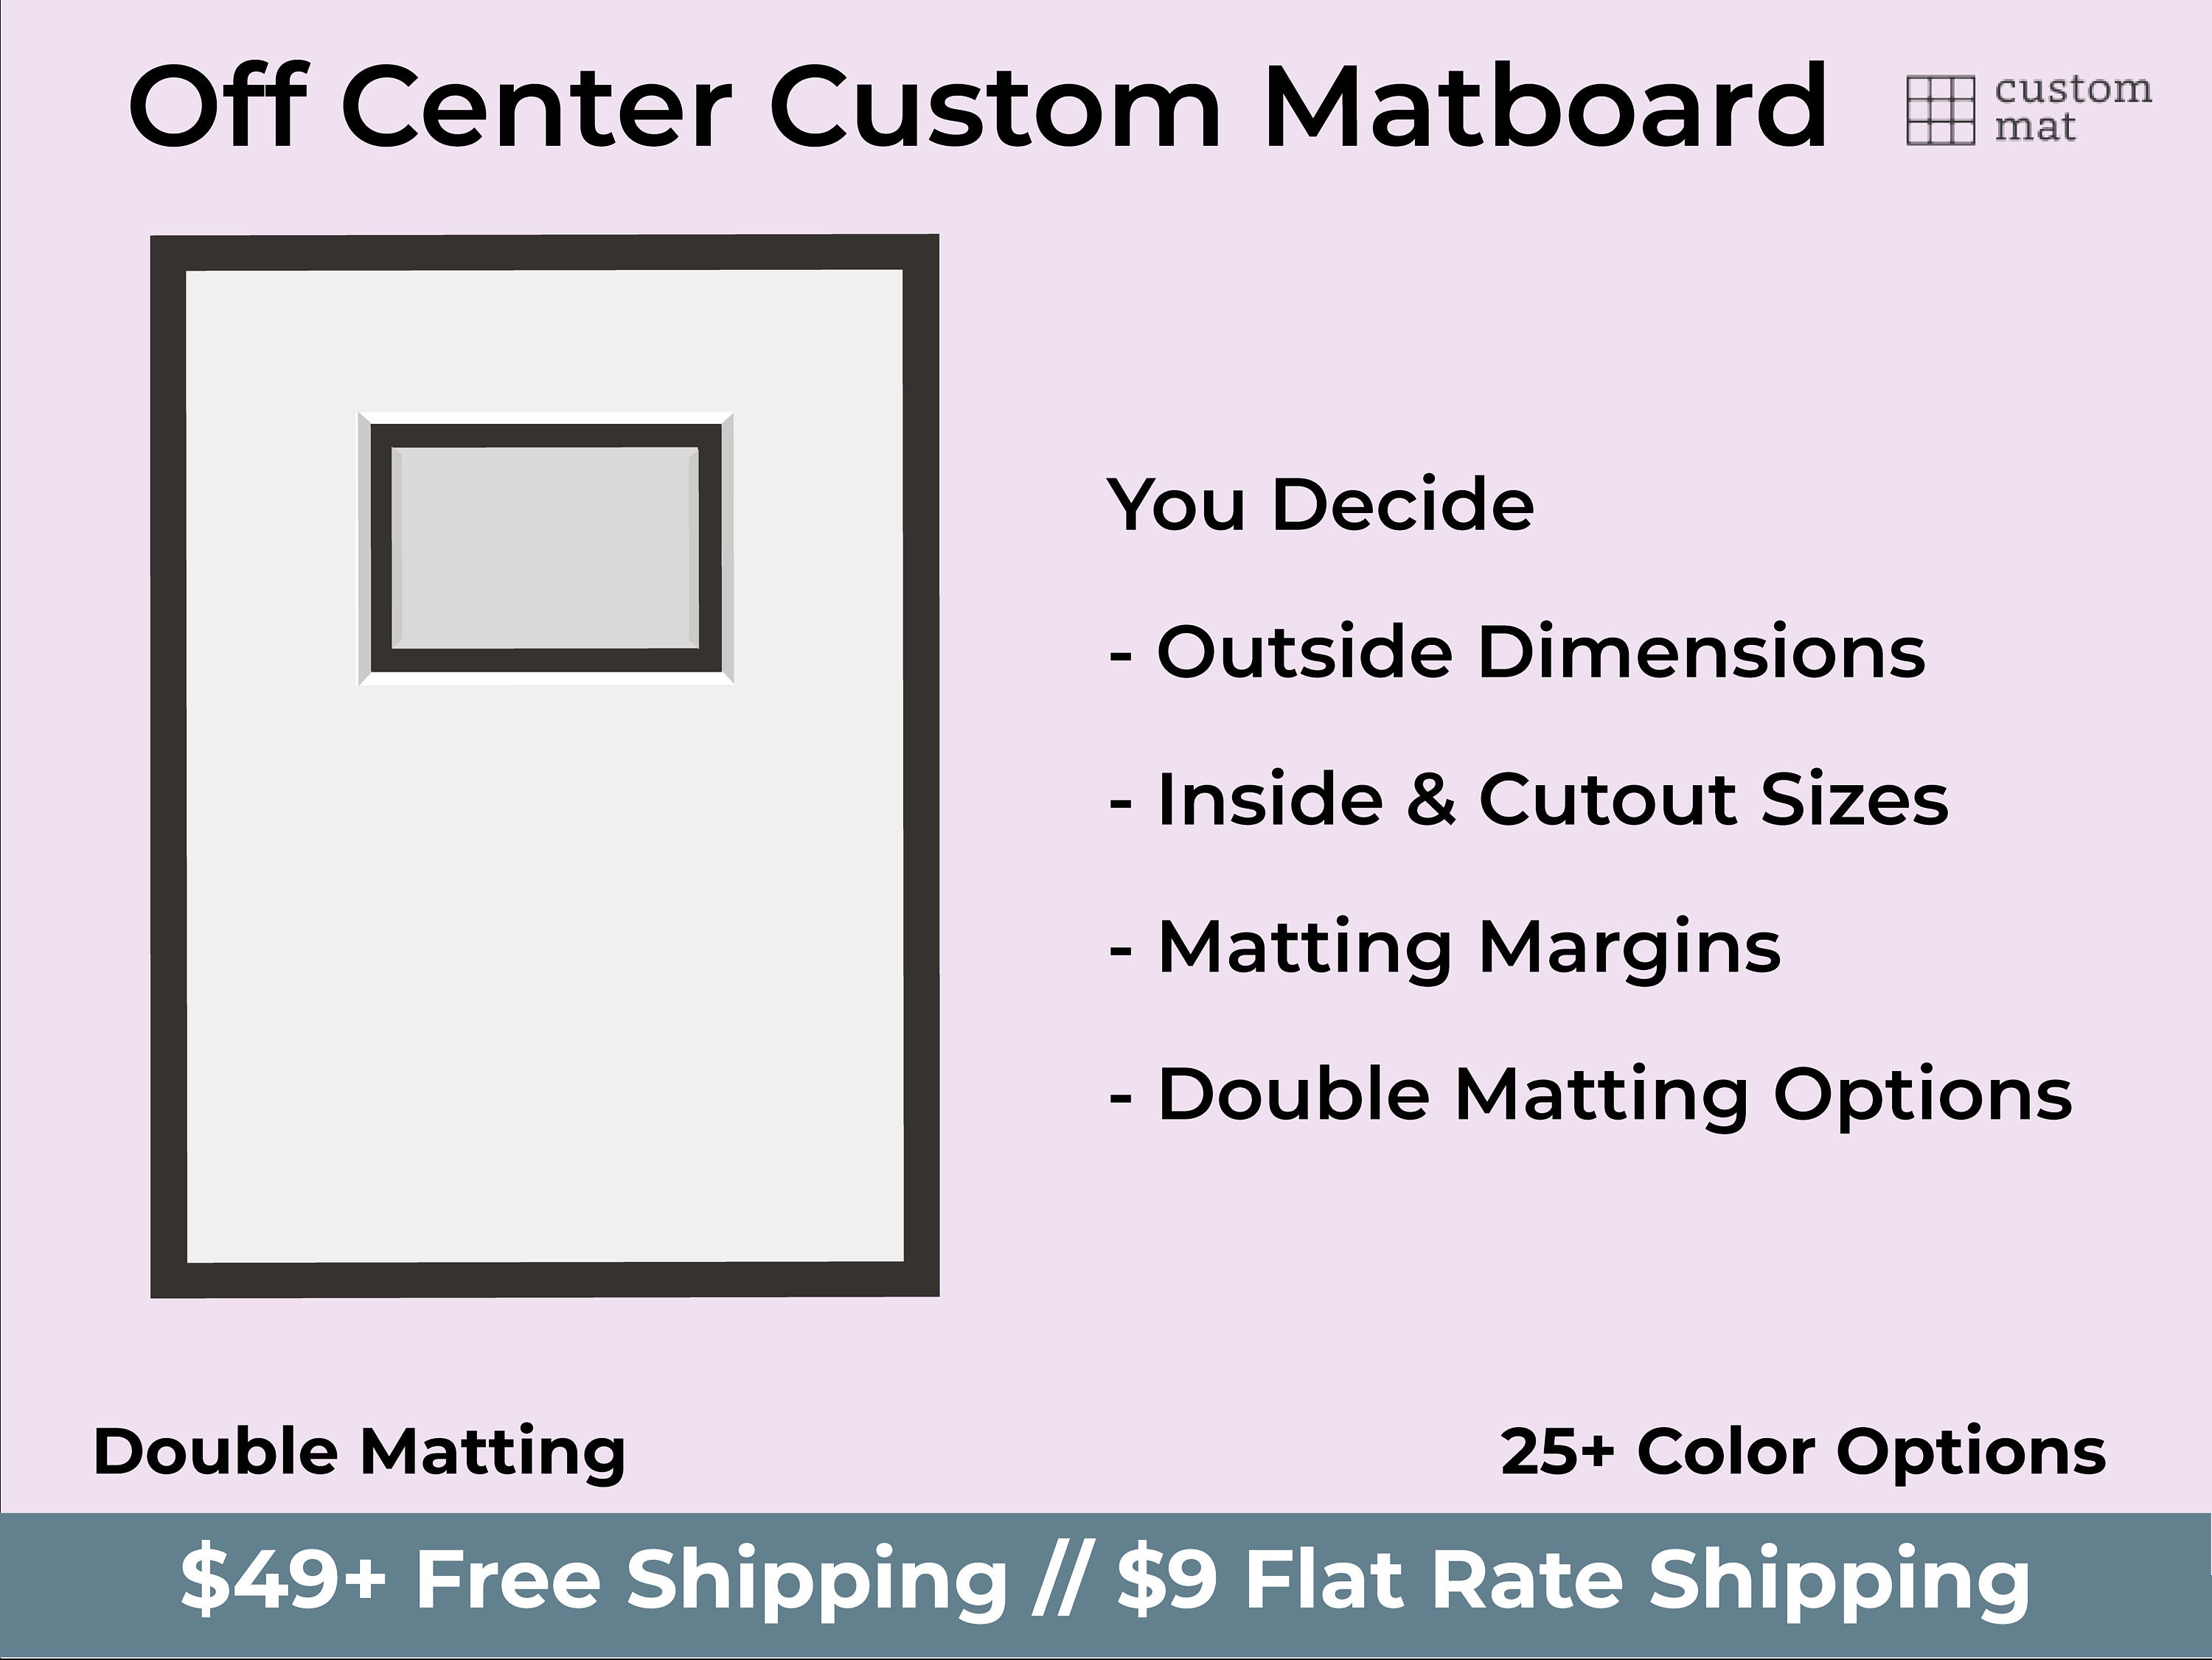  8x10 Mat for 5x7 Photo - Precut Deep Red Picture Matboard for  Frames Measuring 8 x 10 Inches - Bevel Cut Matte to Display Art 5 x 7  Inches - Acid